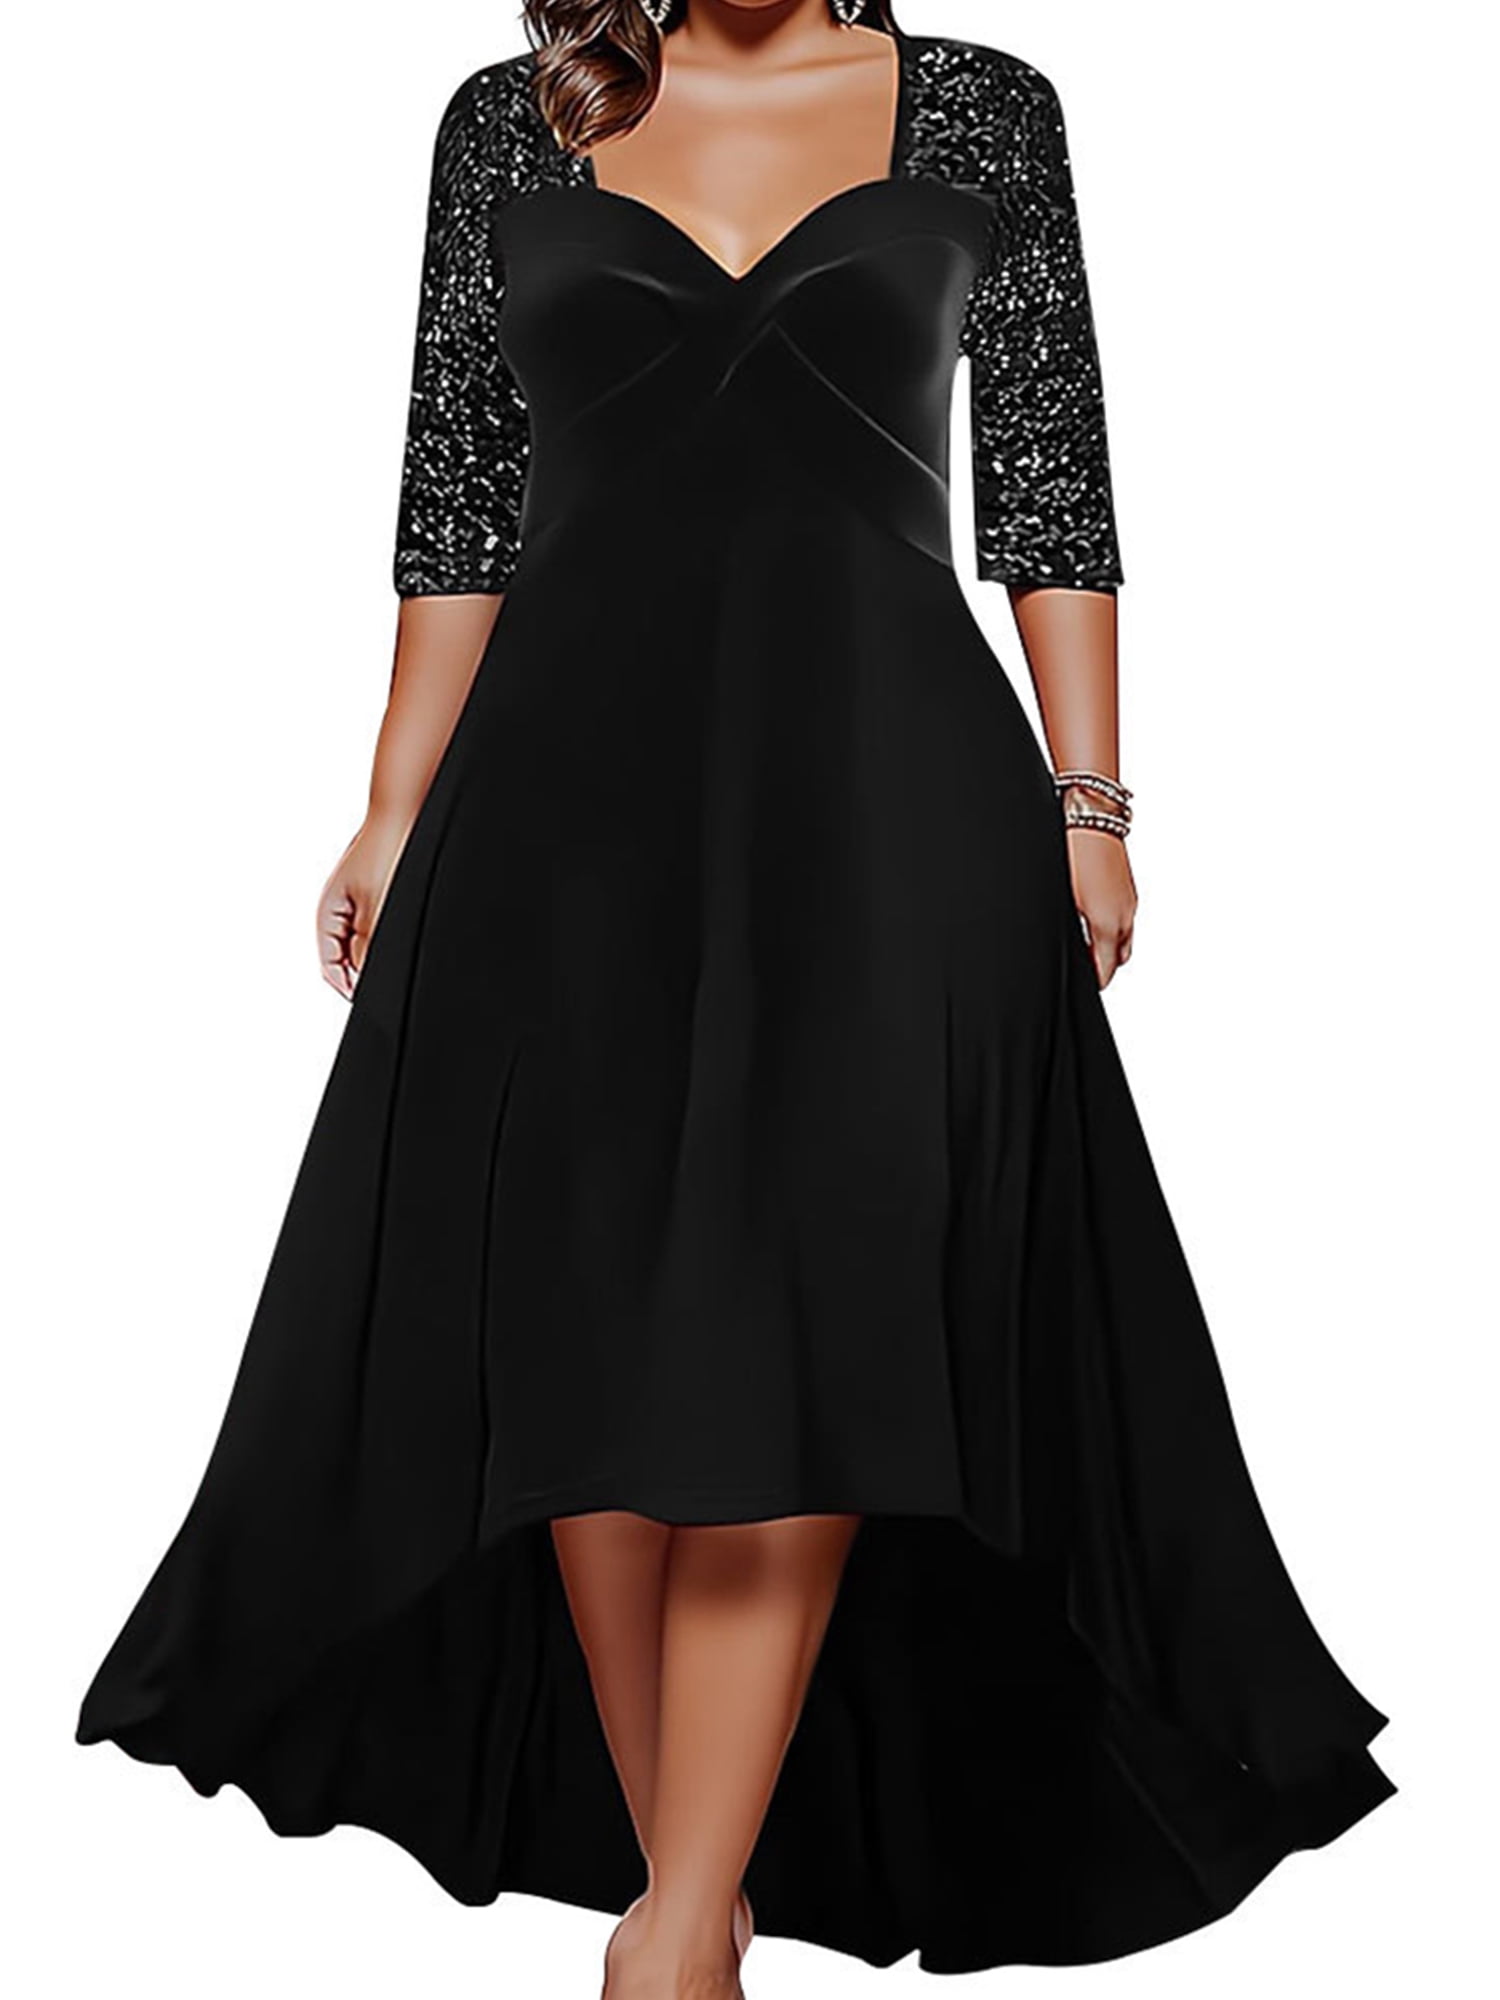 DYMADE Womens Plus Size Party Cocktail Formal Dresses V-Neck Half ...